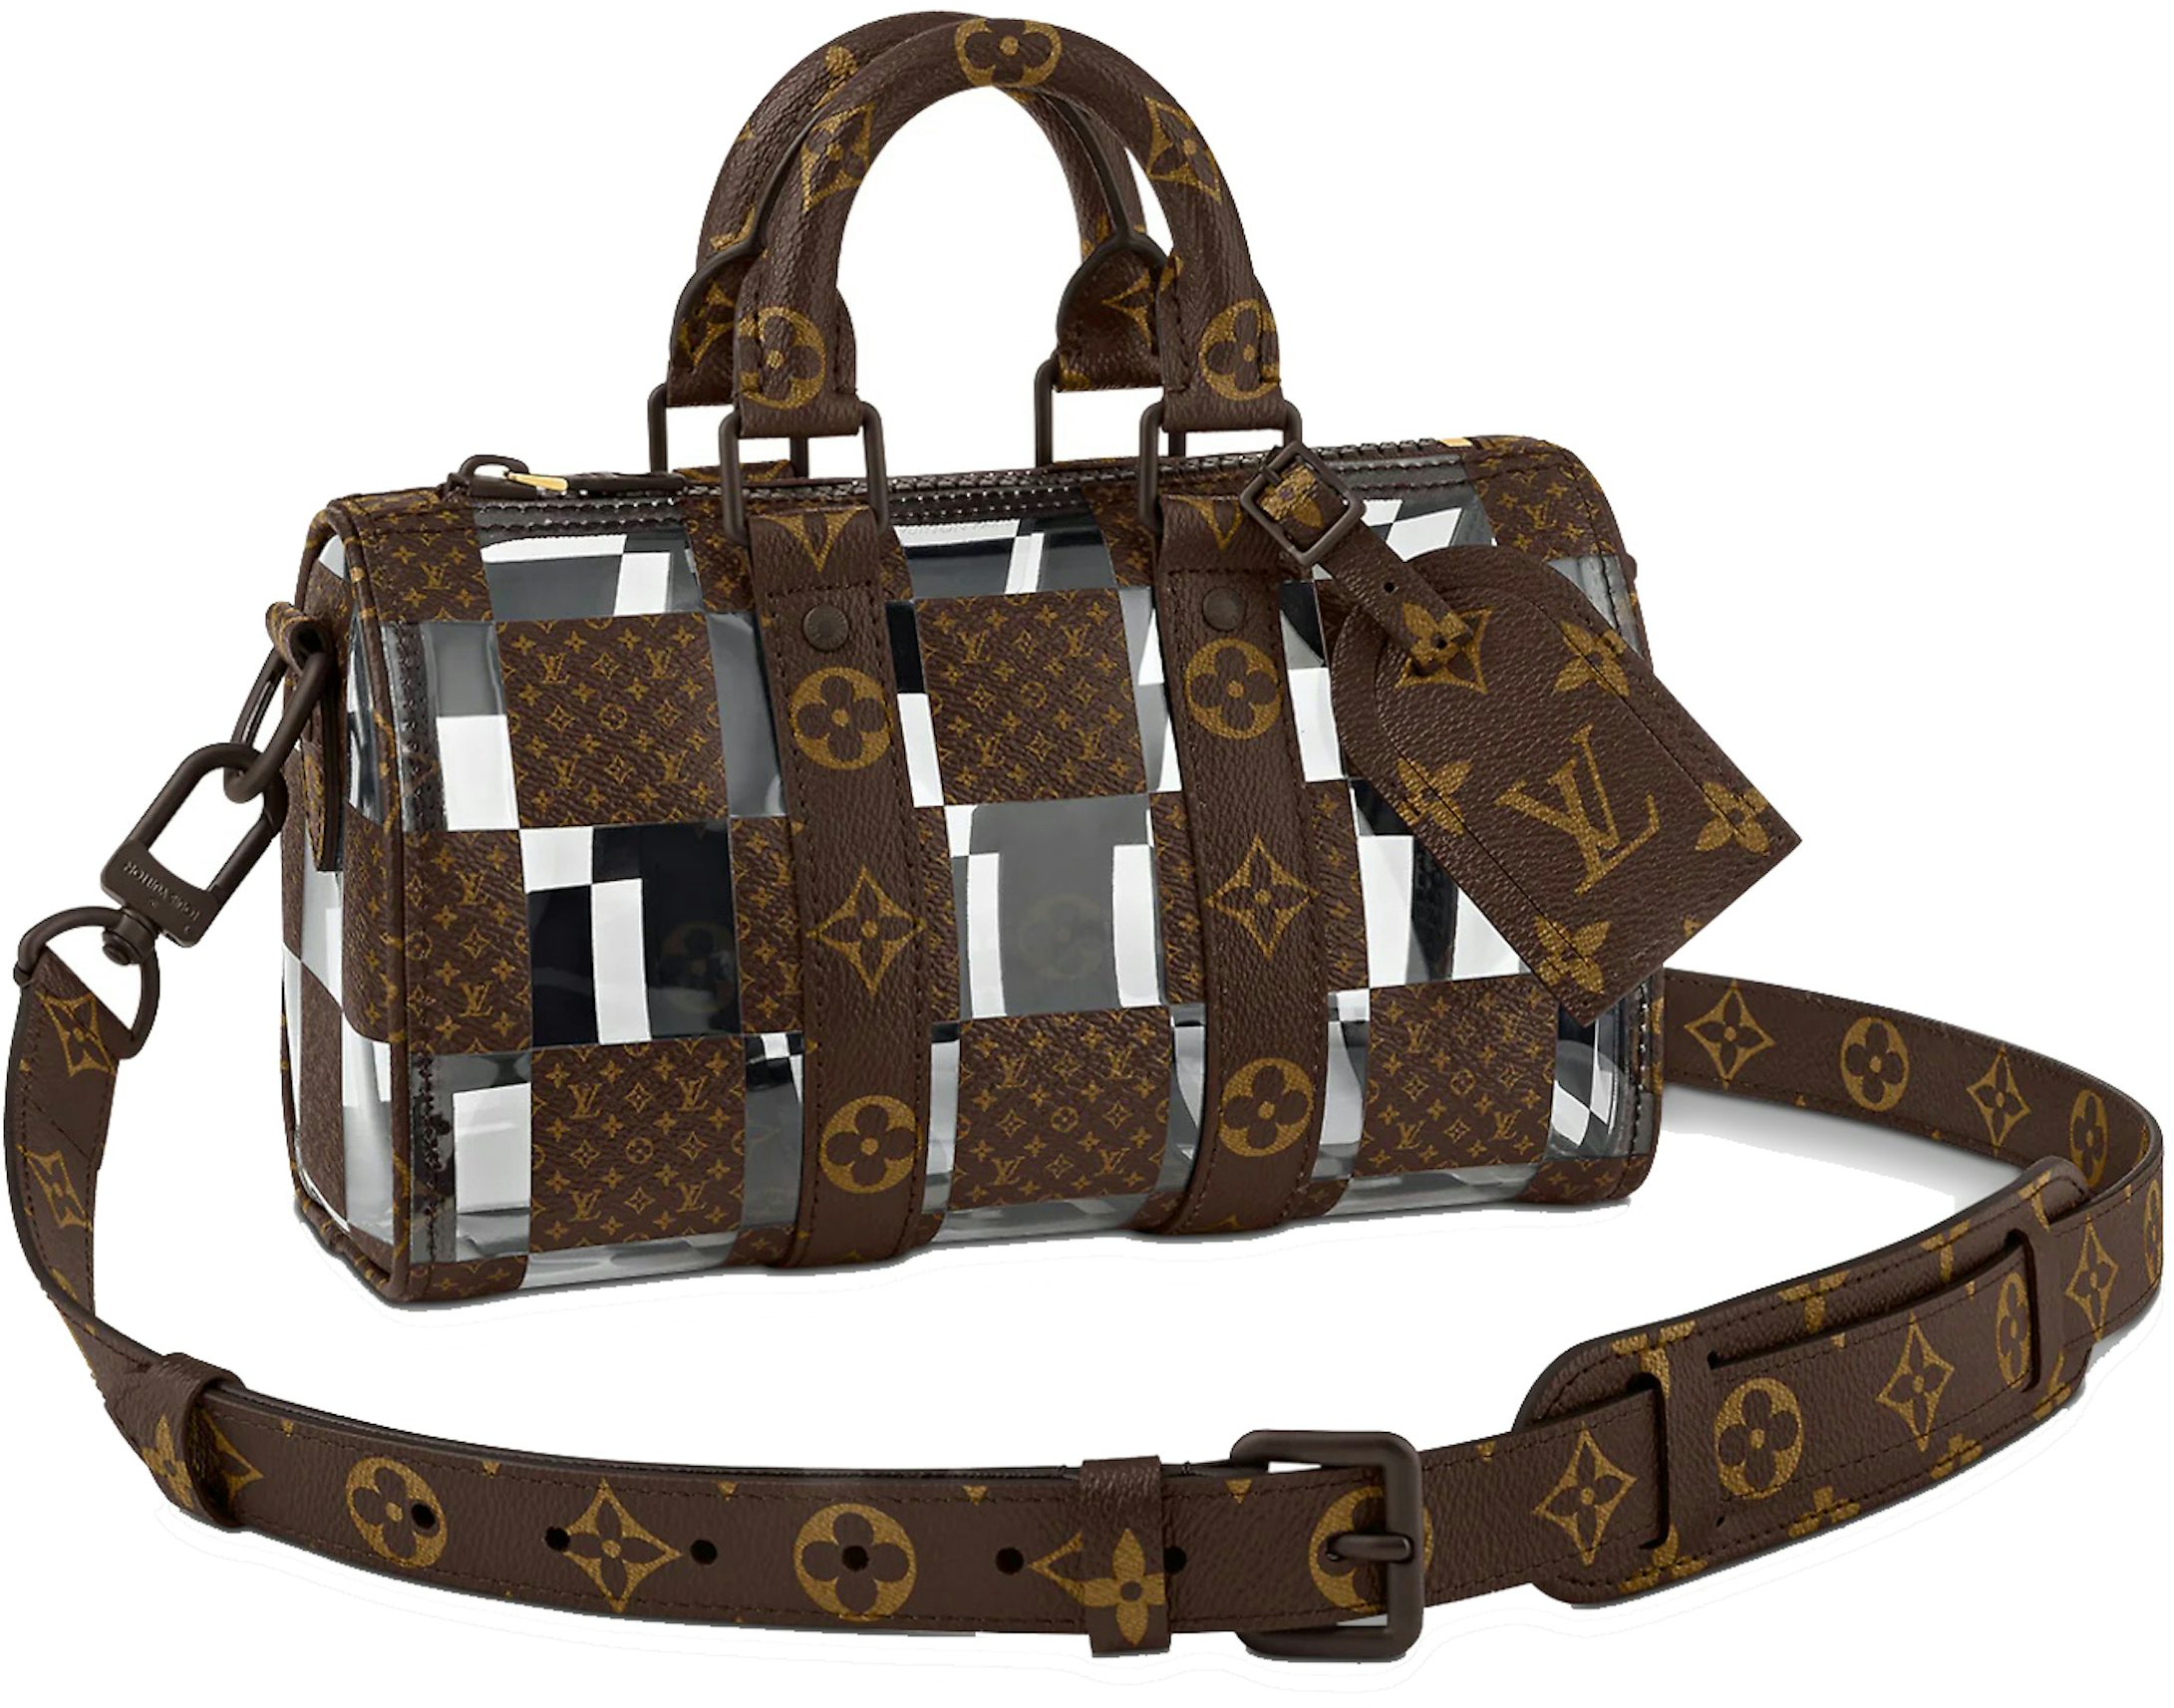 Louis Vuitton Keepall Bandouliere 25 (Blown Up) in Monogram Coated